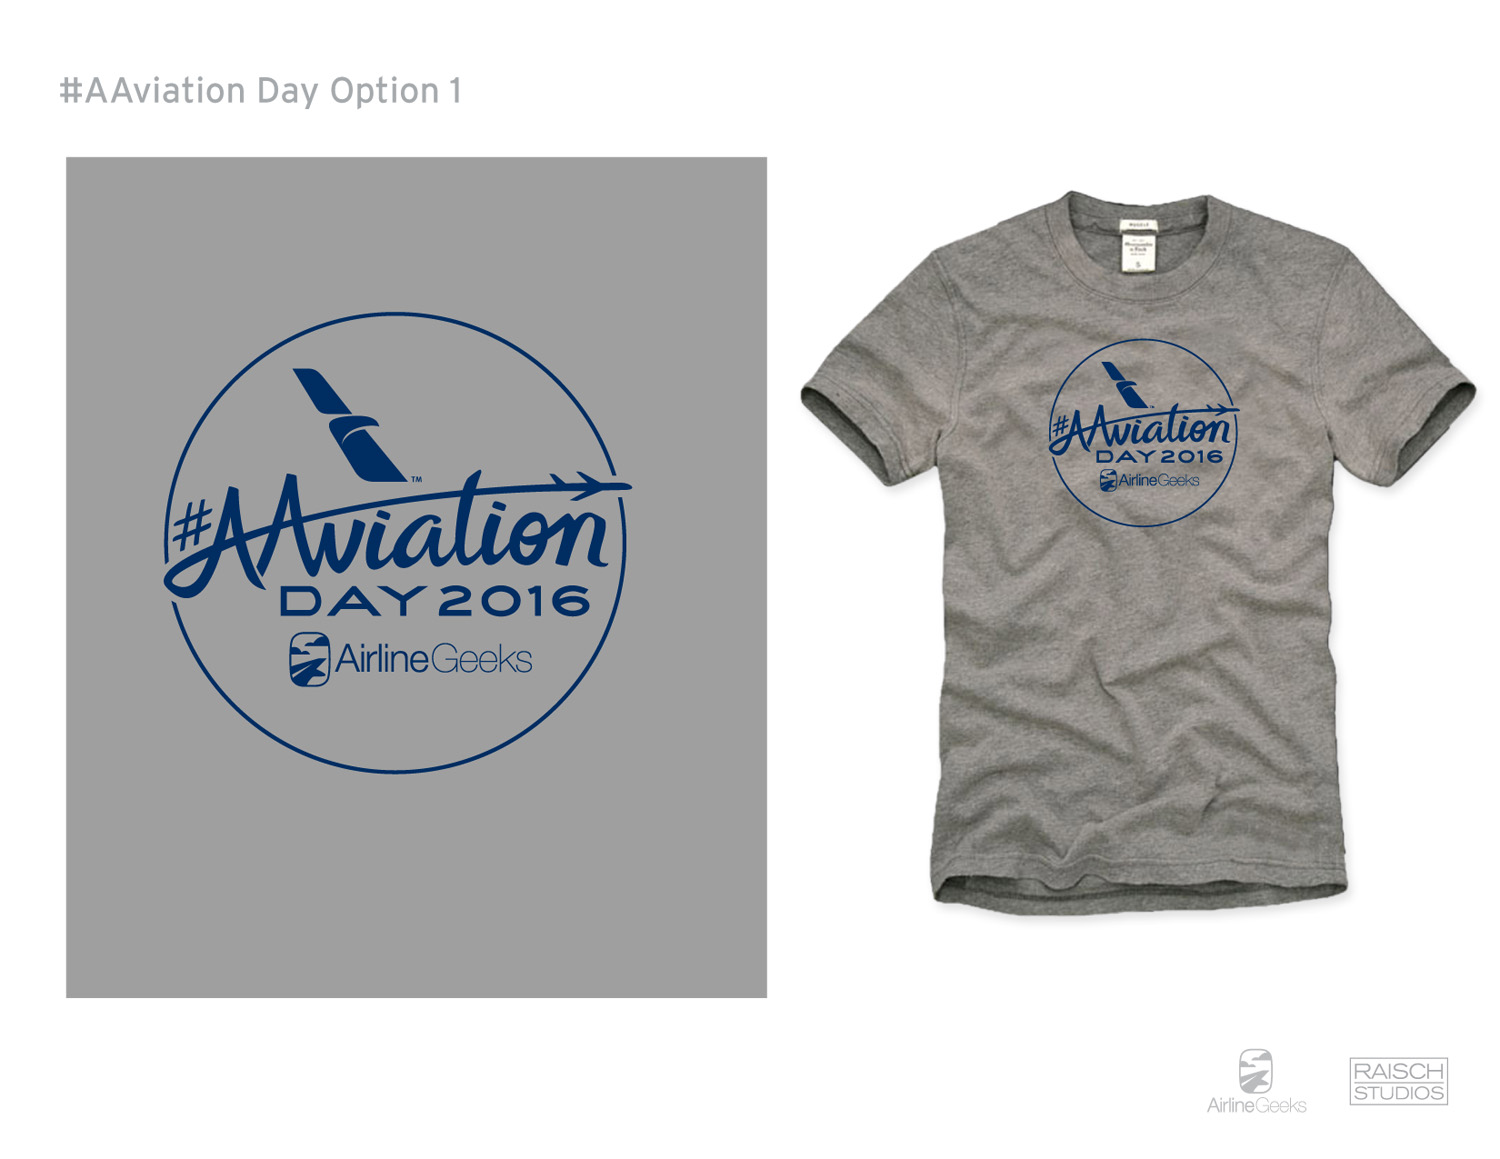 AAviation_Day_Shirts-June28-1A.jpg